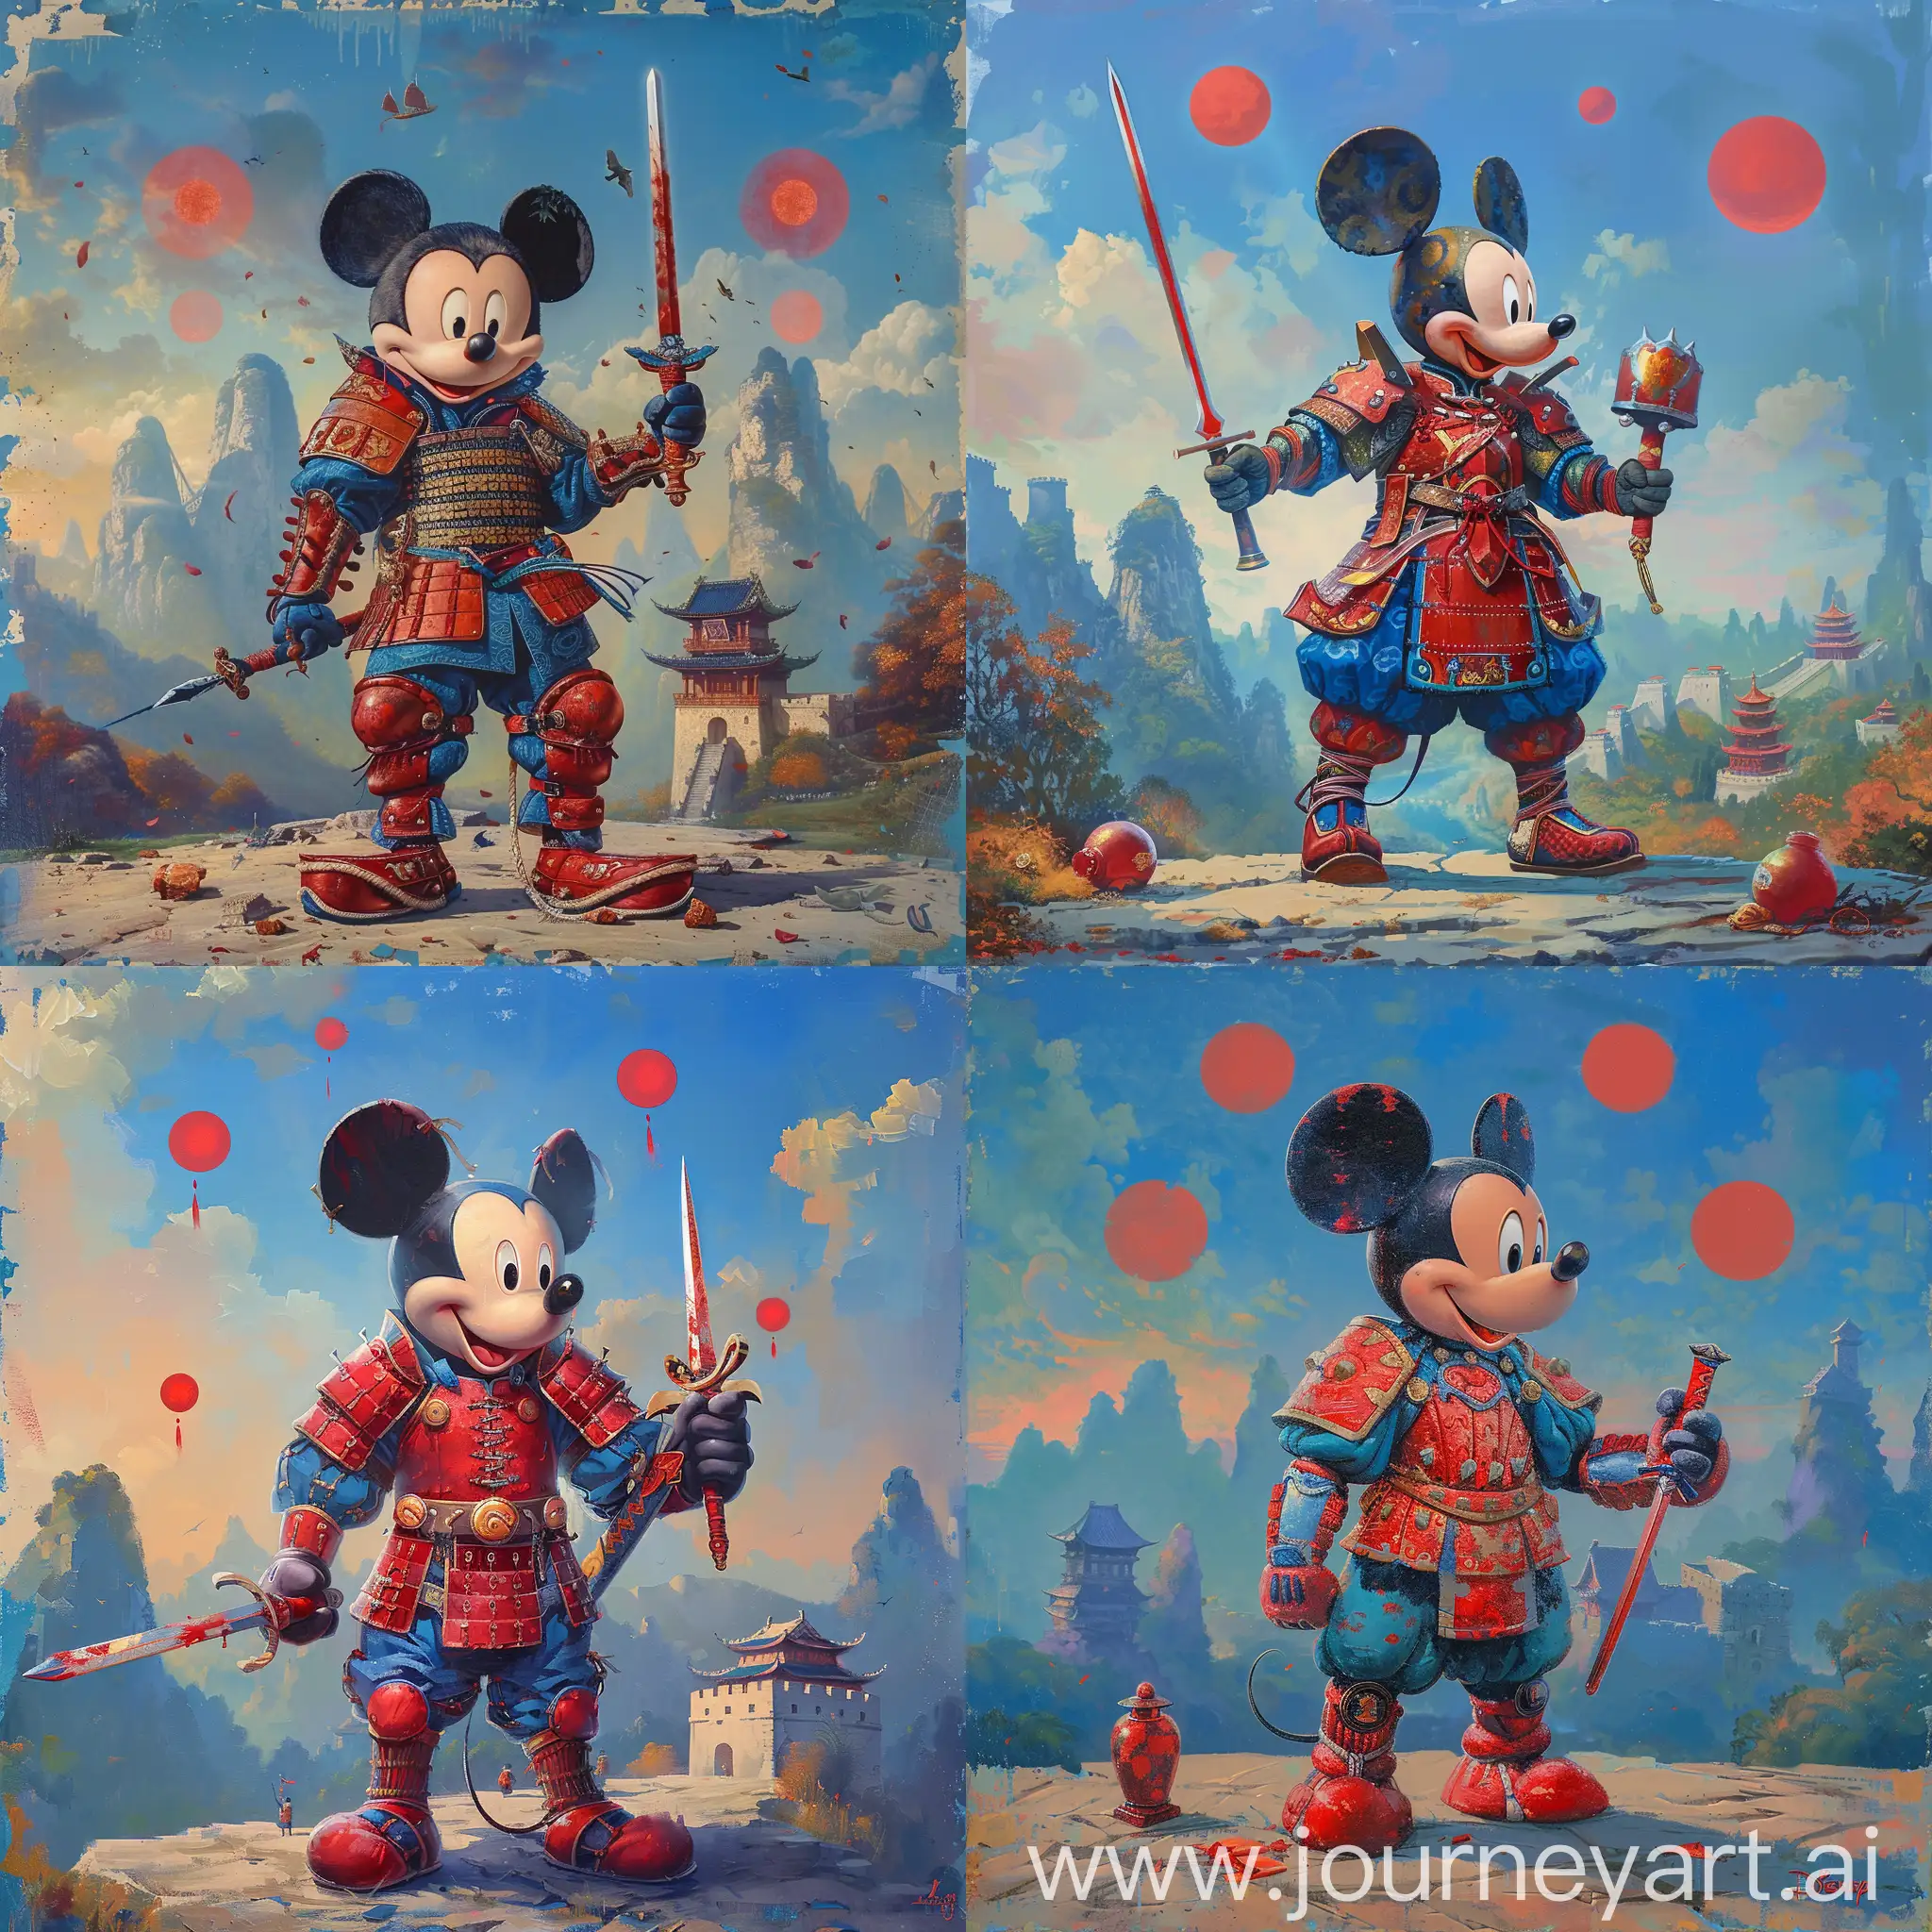 Disney-Mickey-Mouse-in-Chinese-Medieval-Armor-with-Sword-against-Guilin-Mountains-Backdrop